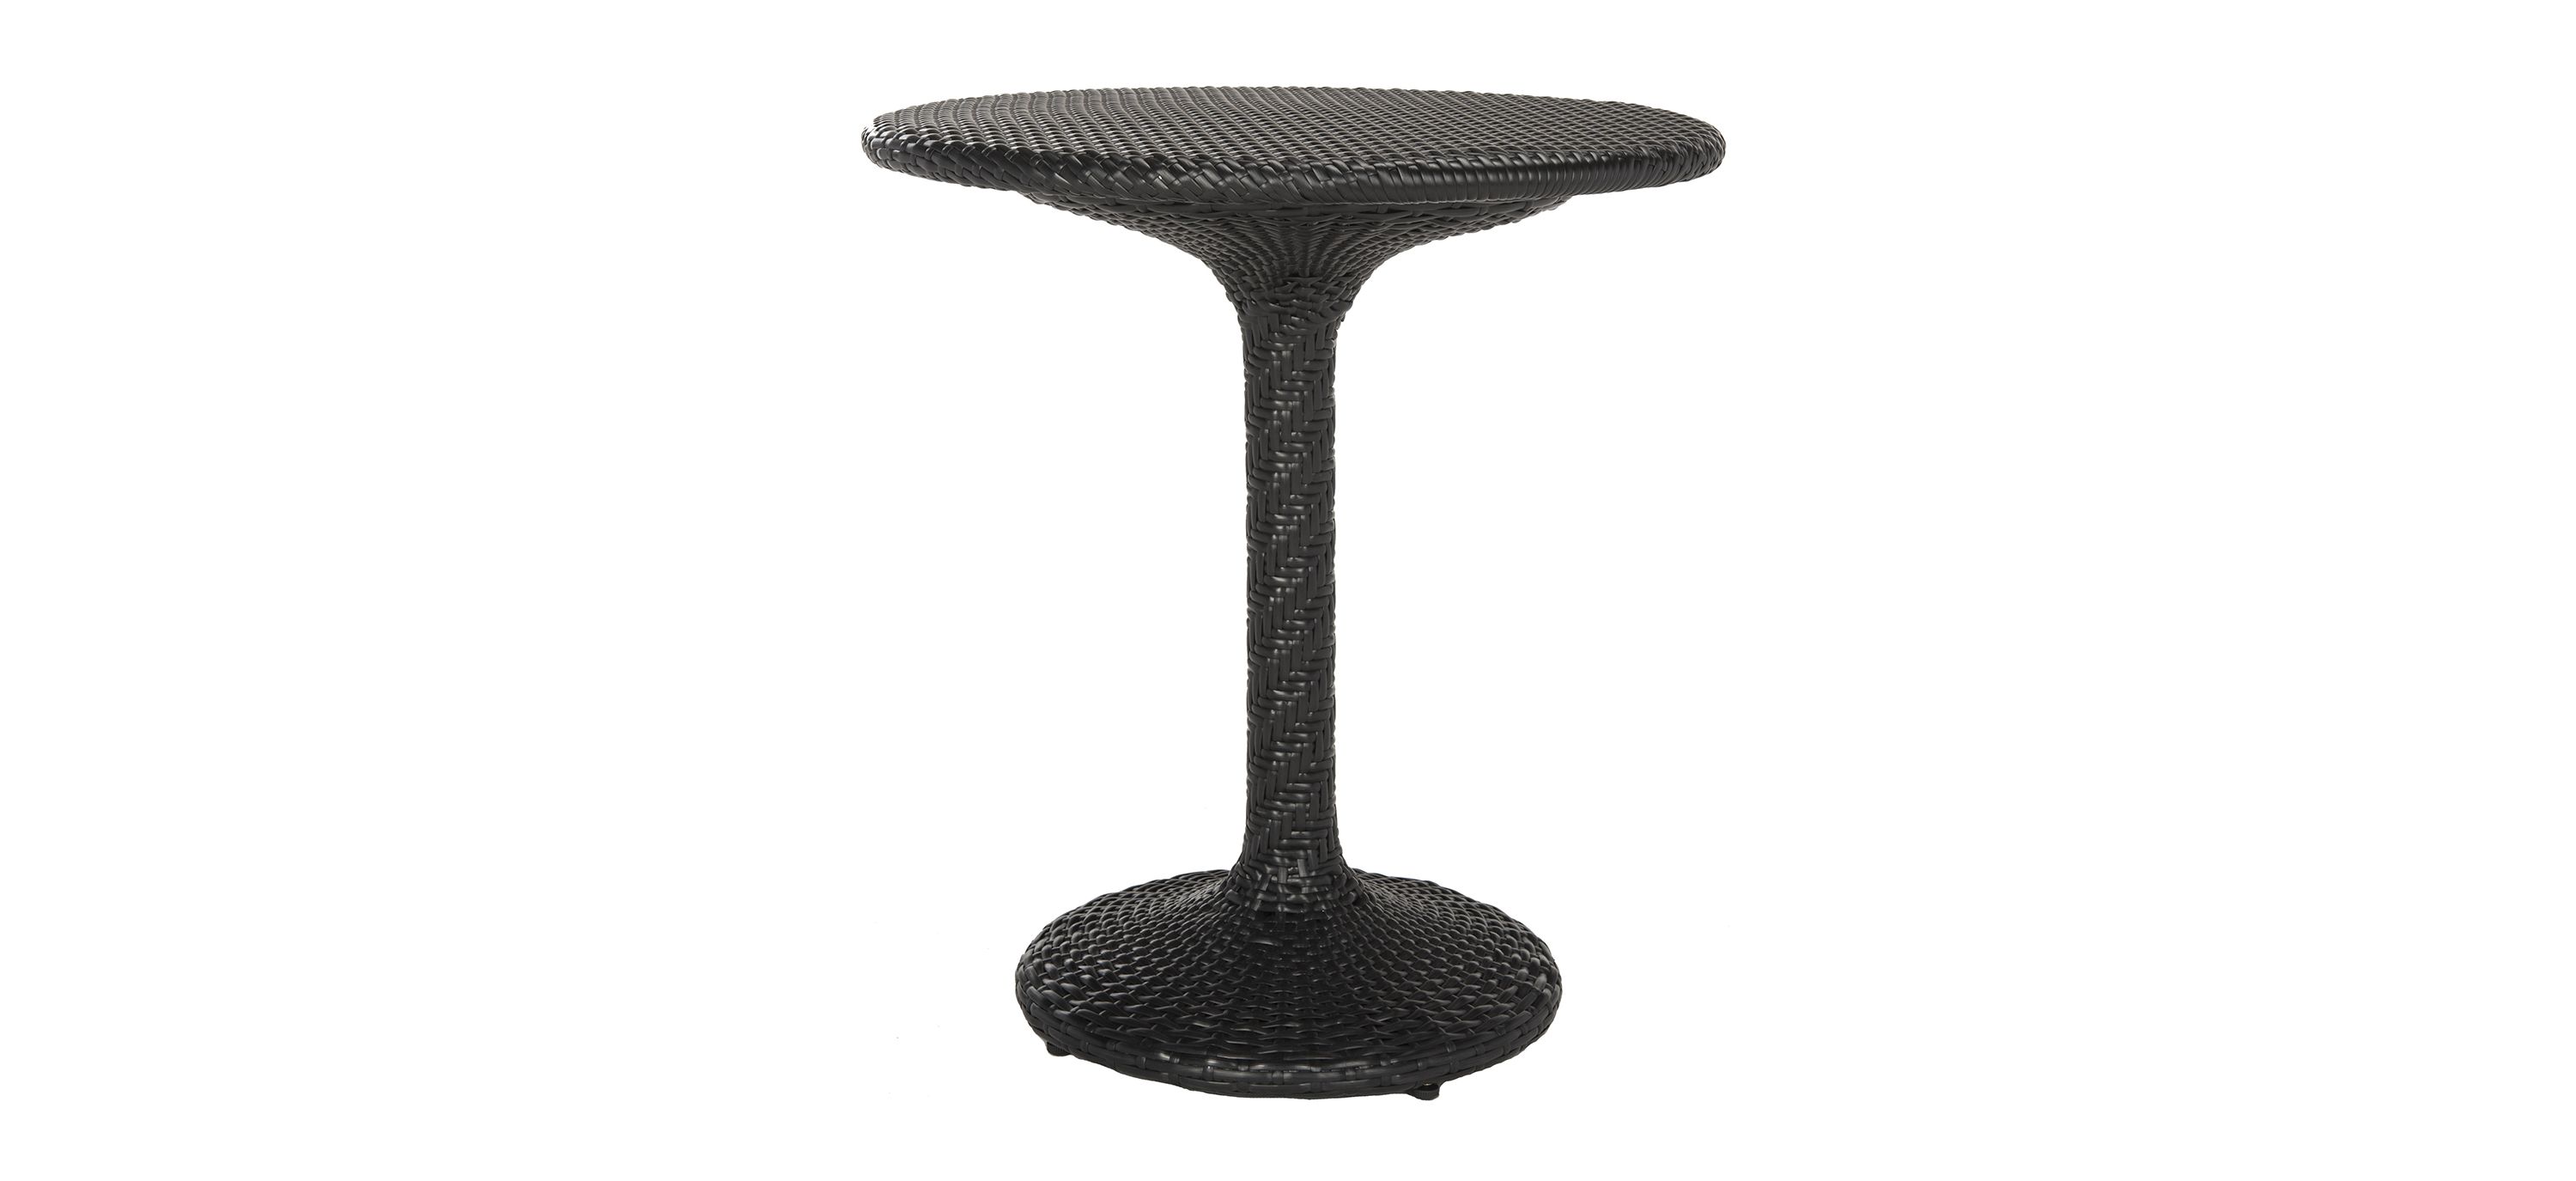 Kinnell Outdoor Rattan Bistro Table